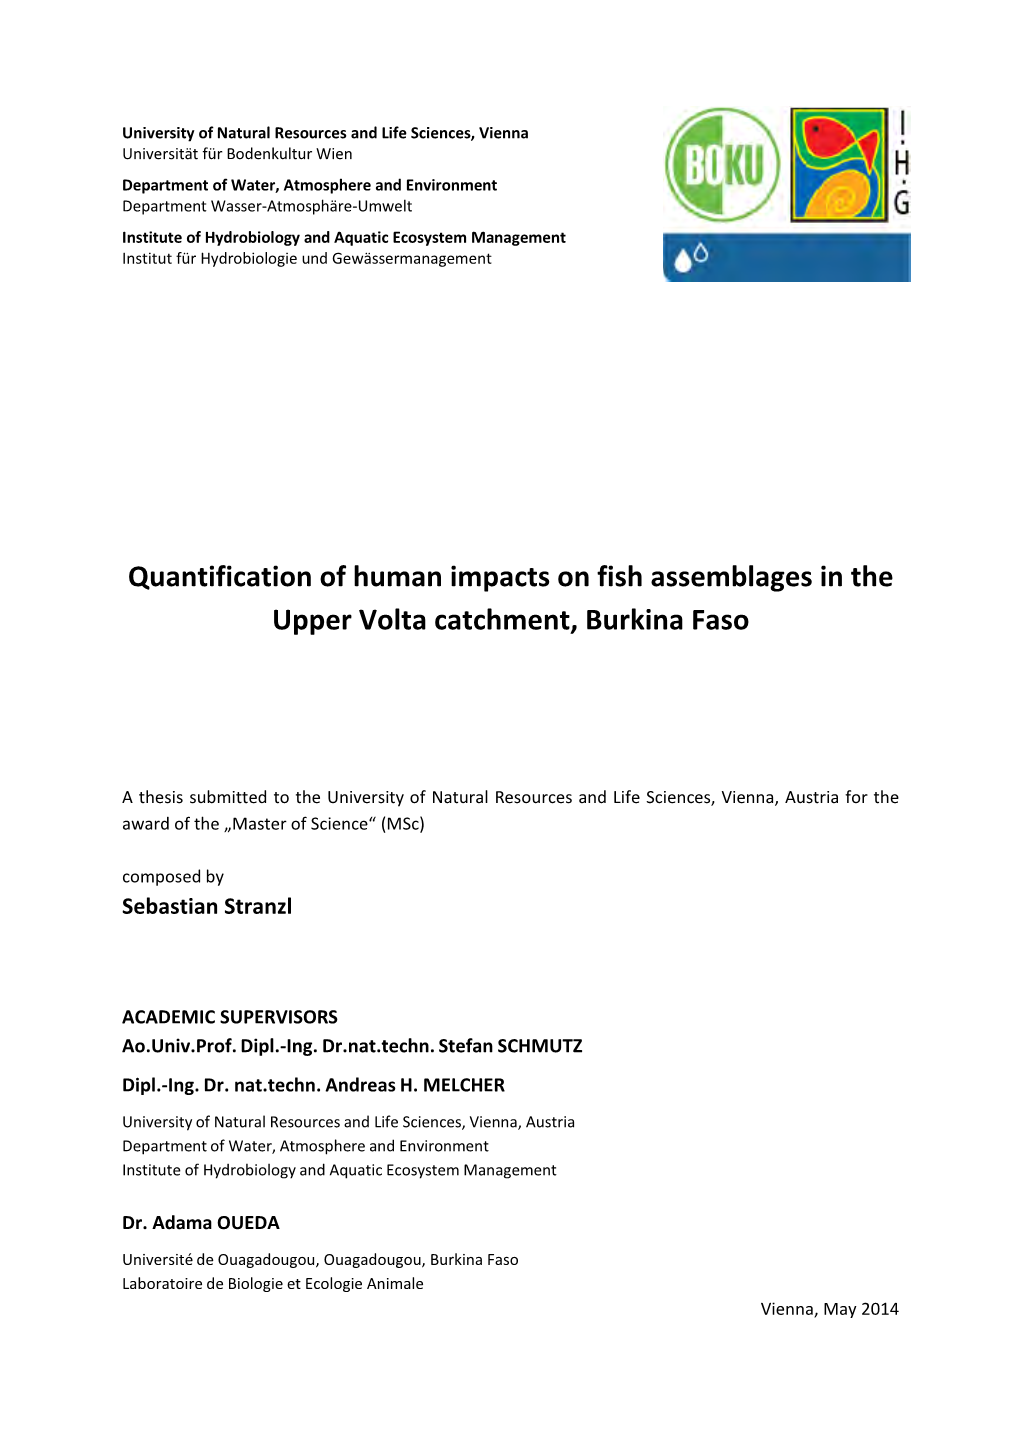 Quantification of Human Impacts on Fish Assemblages in the Upper Volta Catchment, Burkina Faso